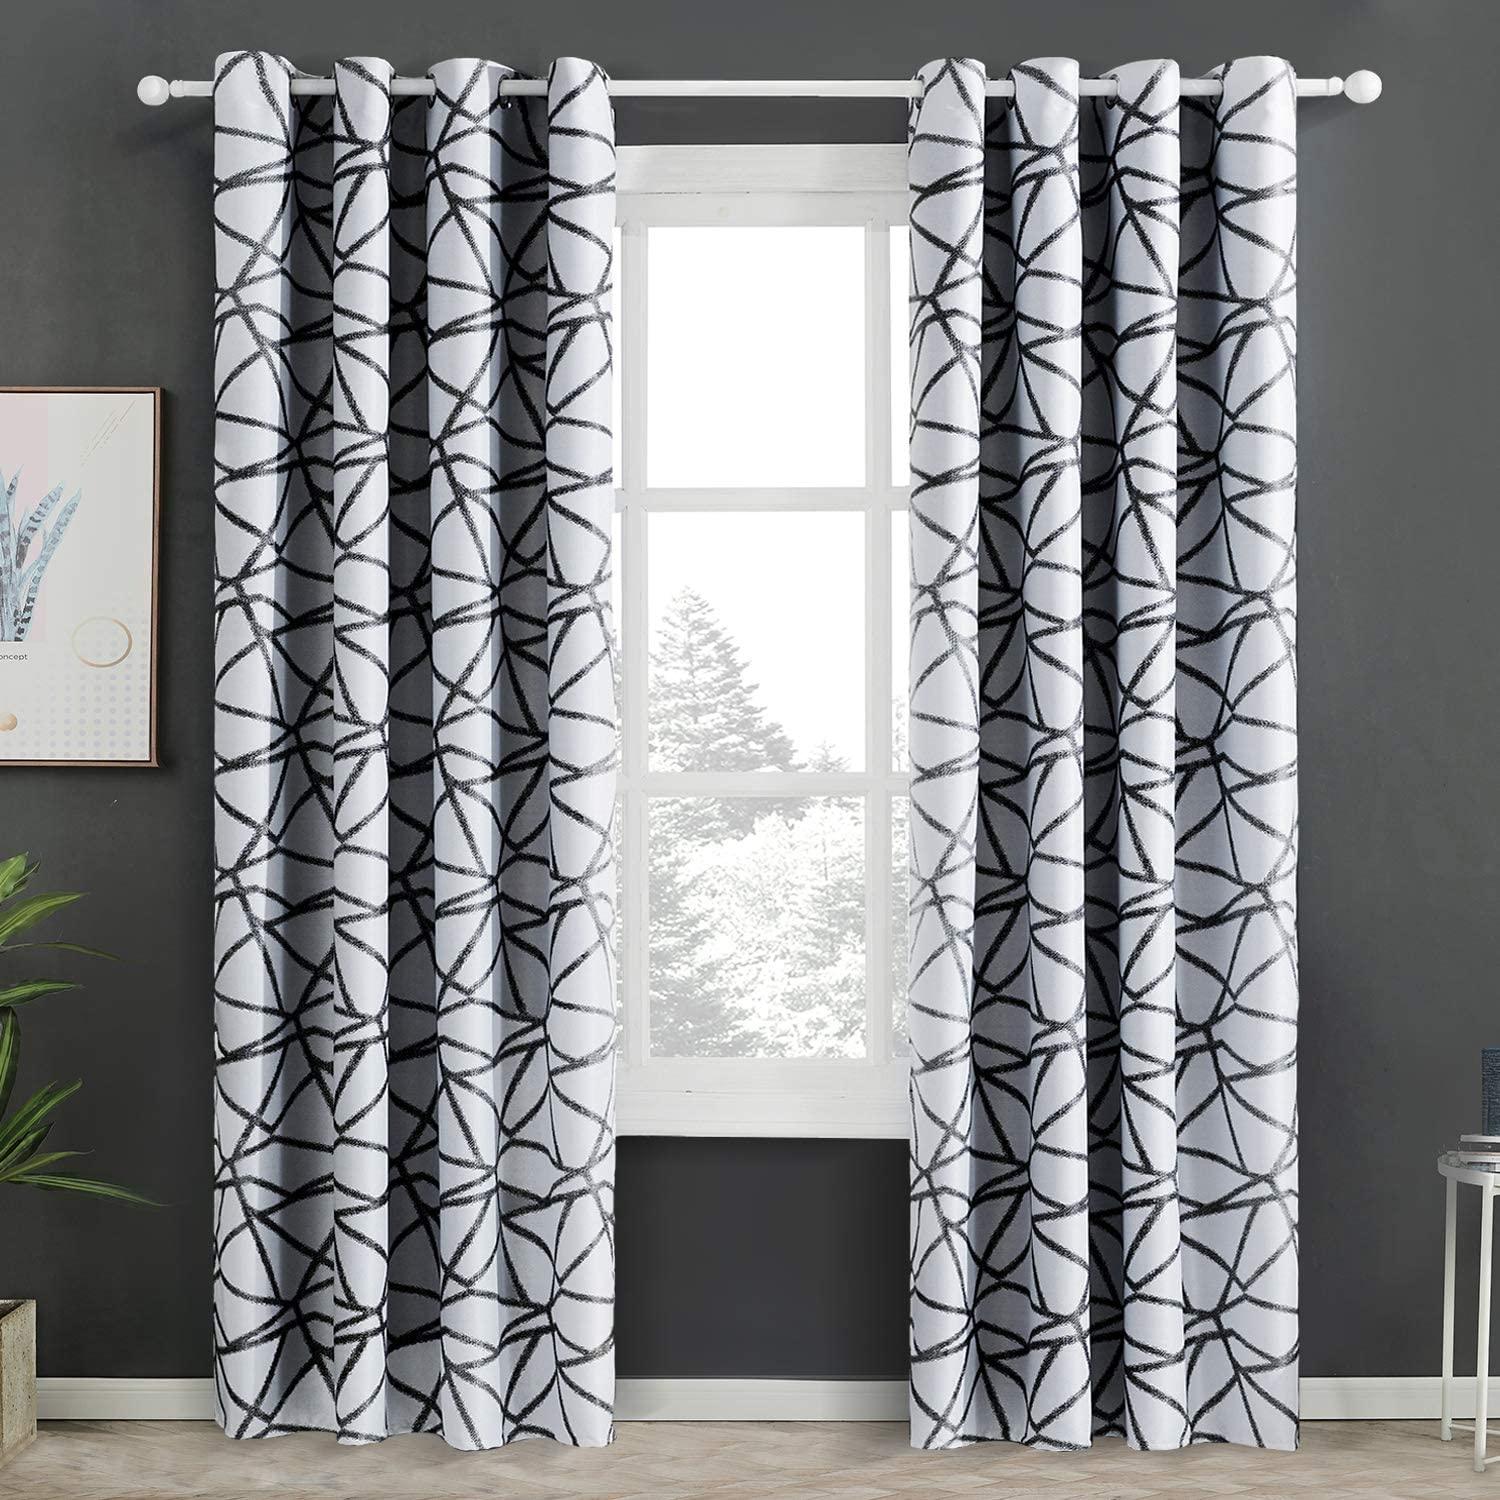 Topfinel Panels Printed Blackout Curtains for Bedroom, Winter Best Insulating Curtain - Topfinel